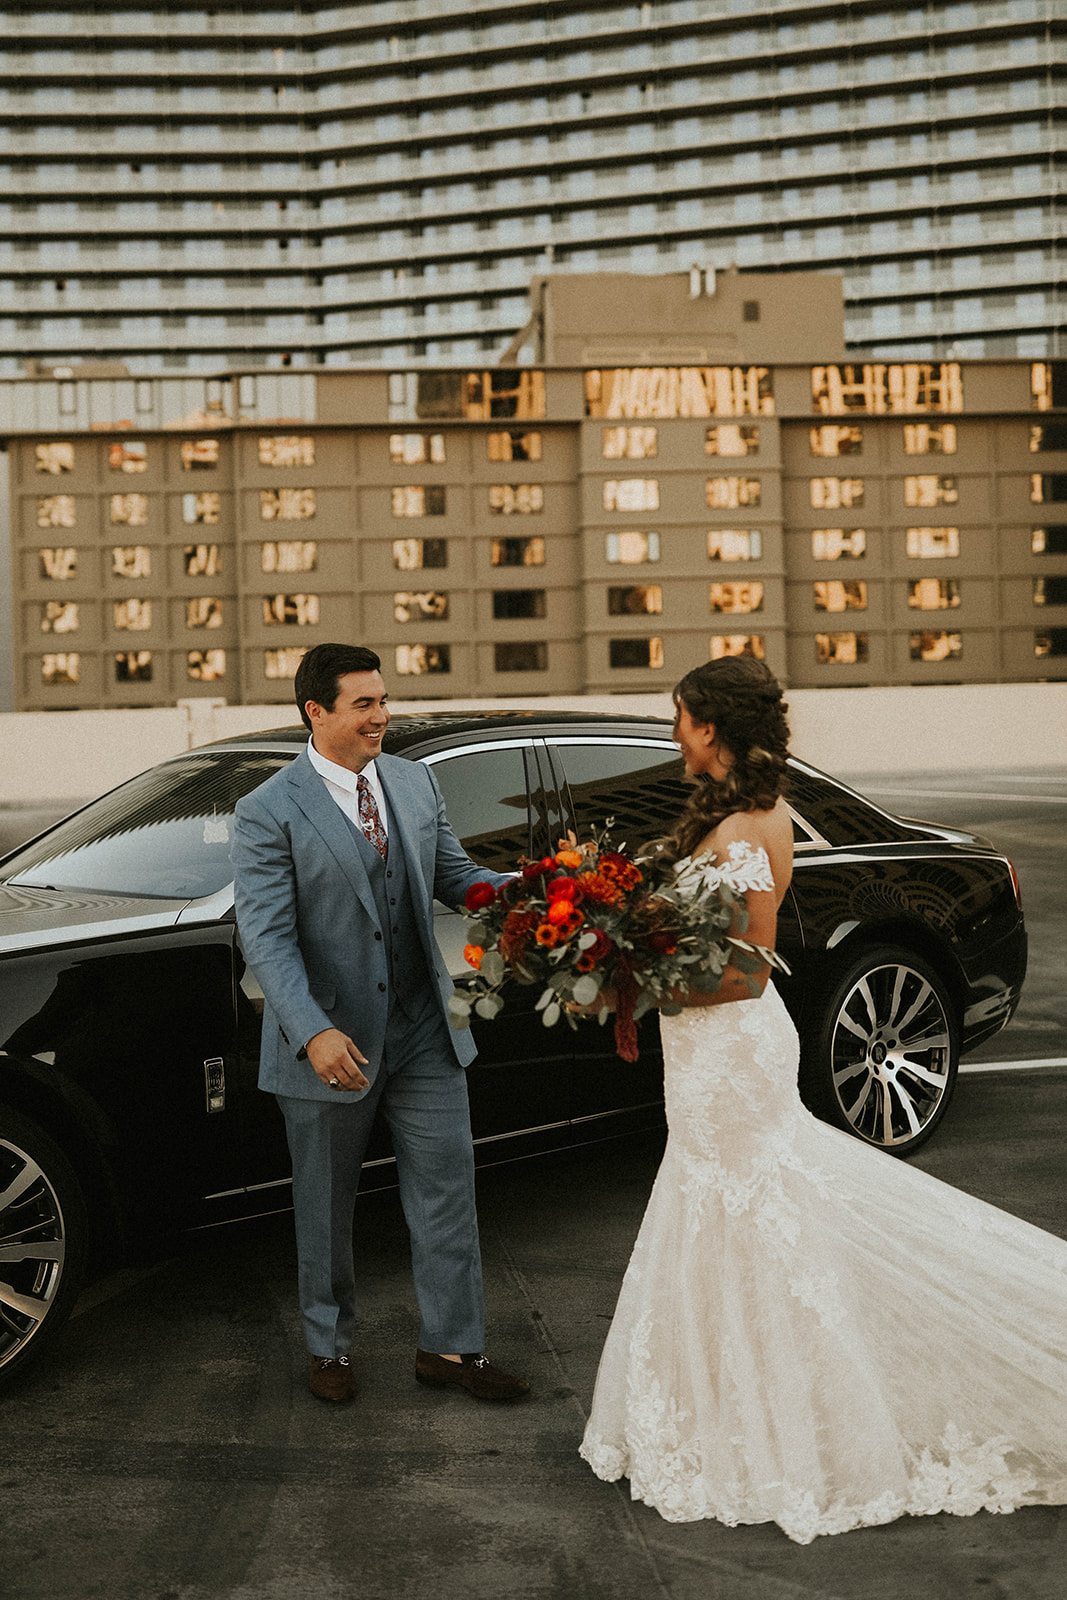 Groom seeing bride for first time in front of Rolls Royce in Las Vegas 